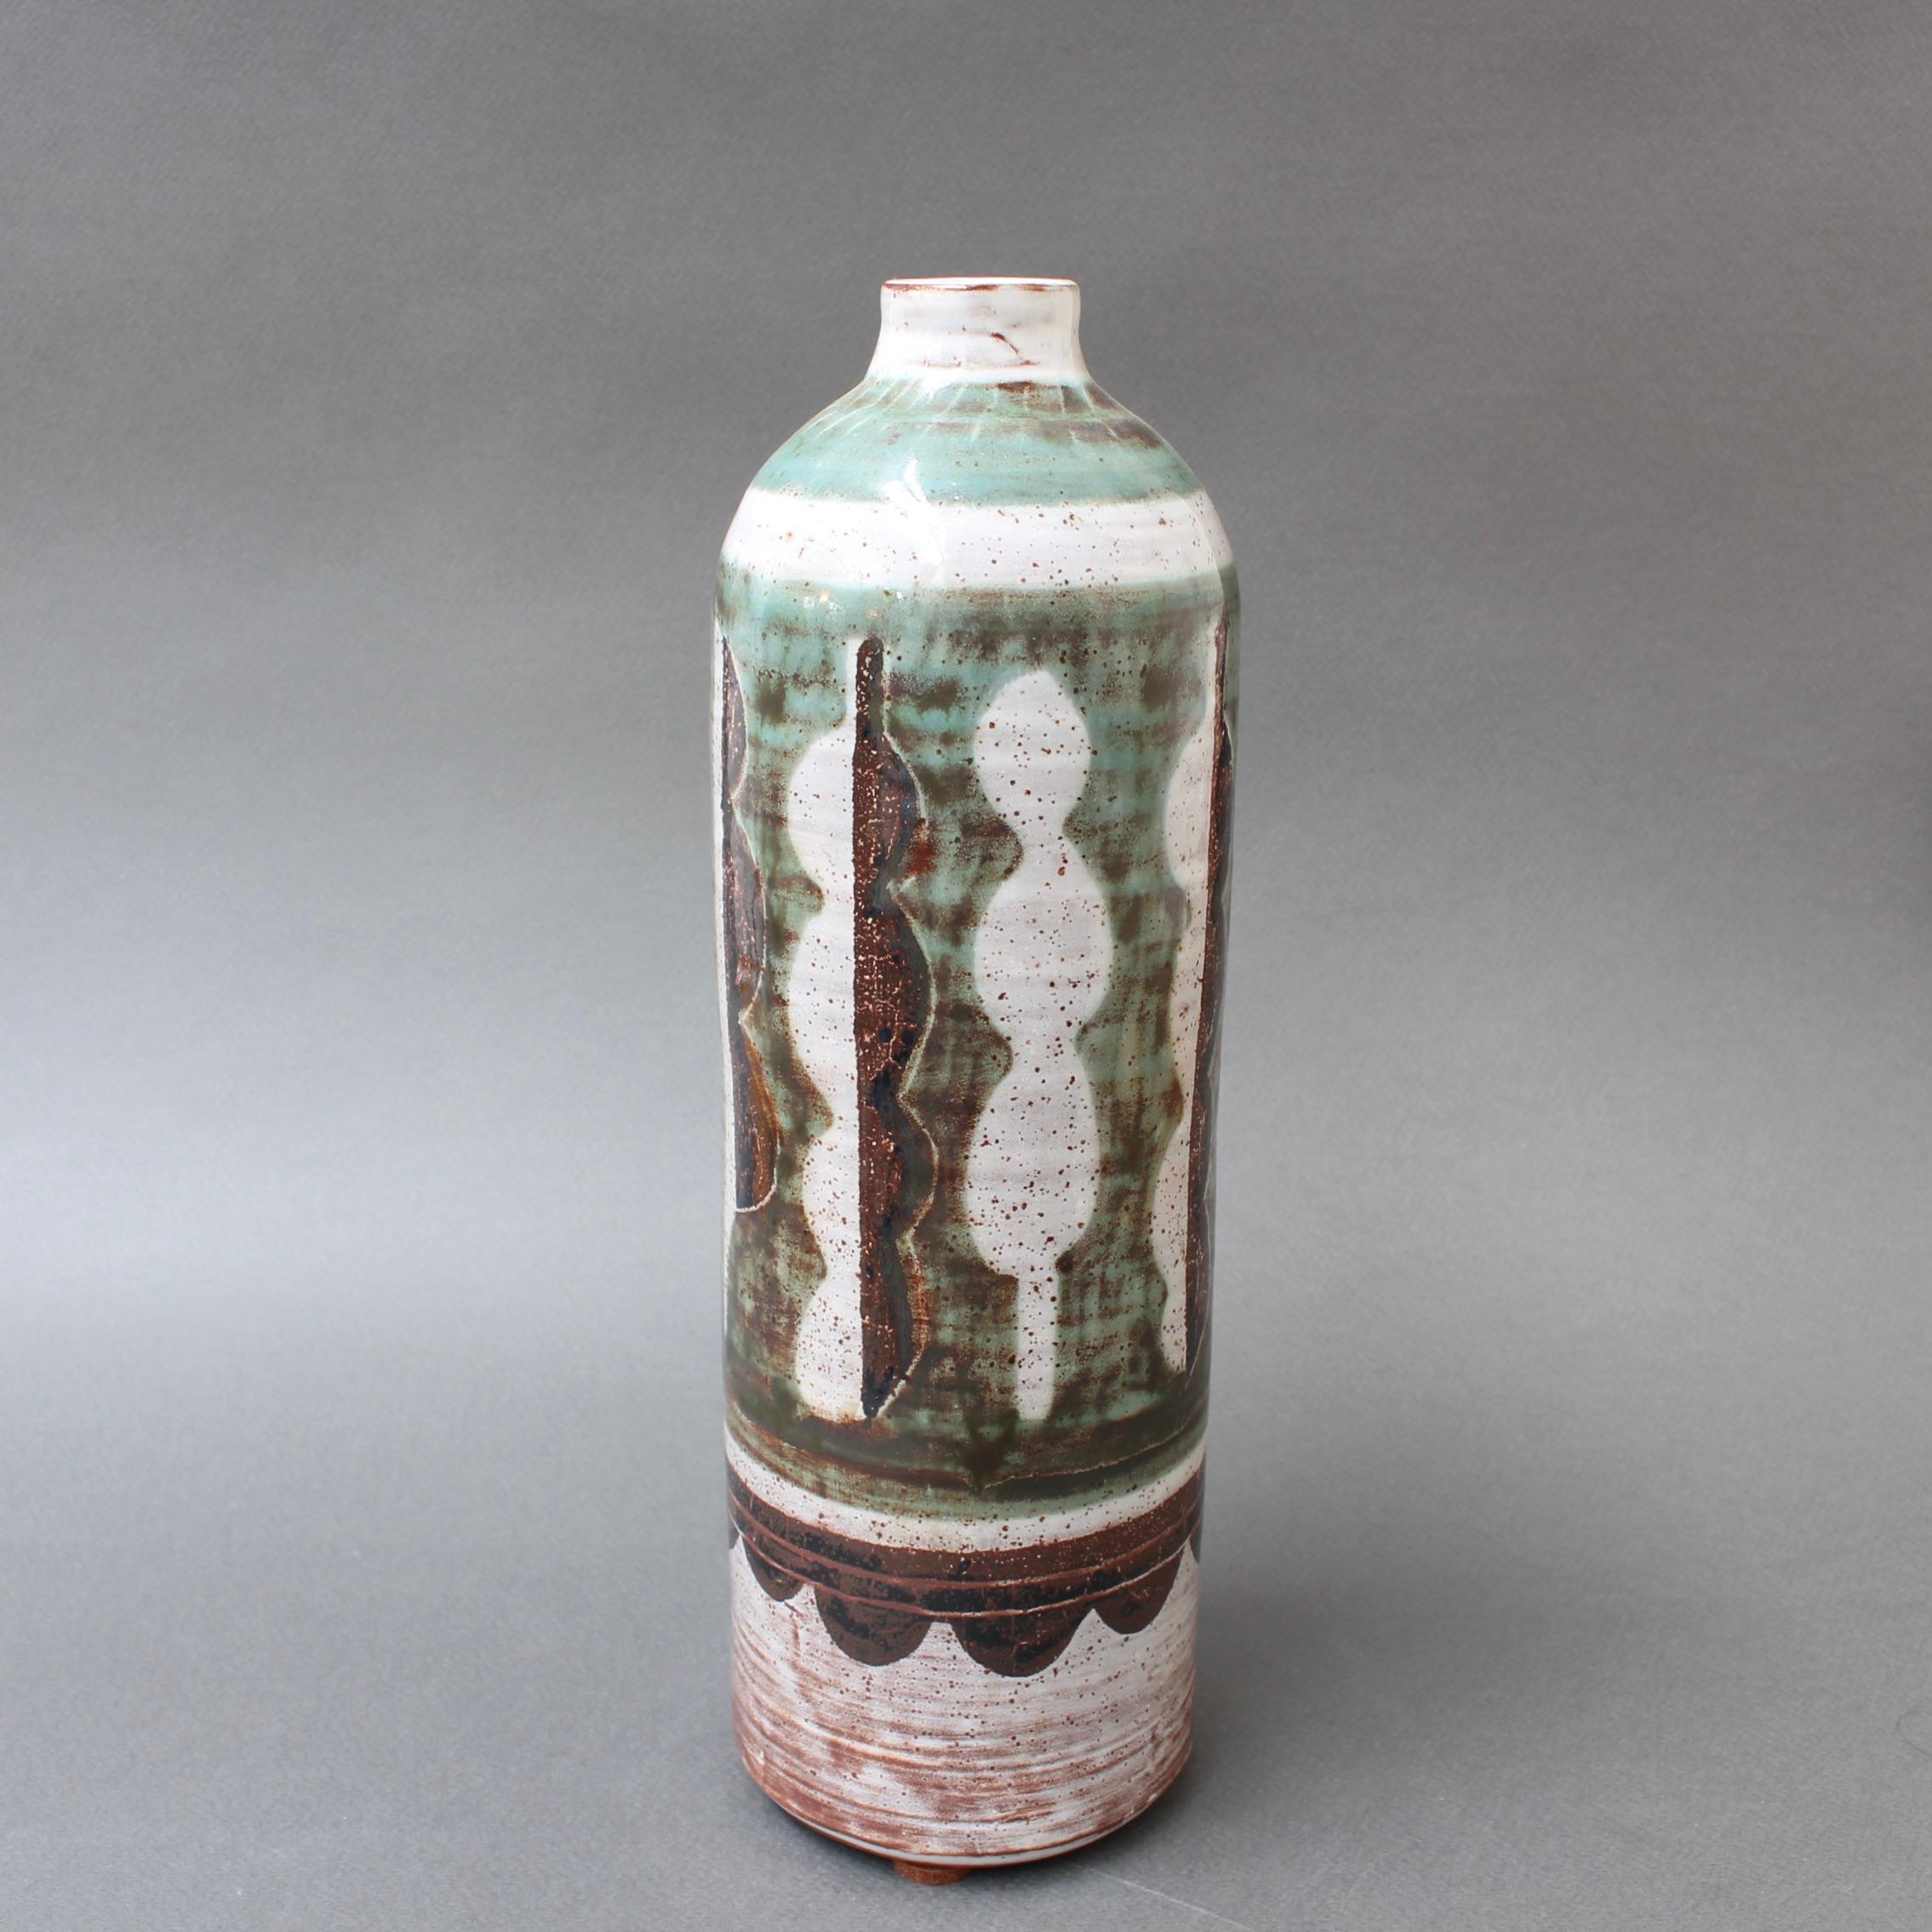 Midcentury ceramic flower vase (circa 1960s) by Michel Barbier. A tall single-flower vase with abstract motif combining a jade green and brown over an off-white elegant glaze with small specks. The understated colors of the vase means the piece will